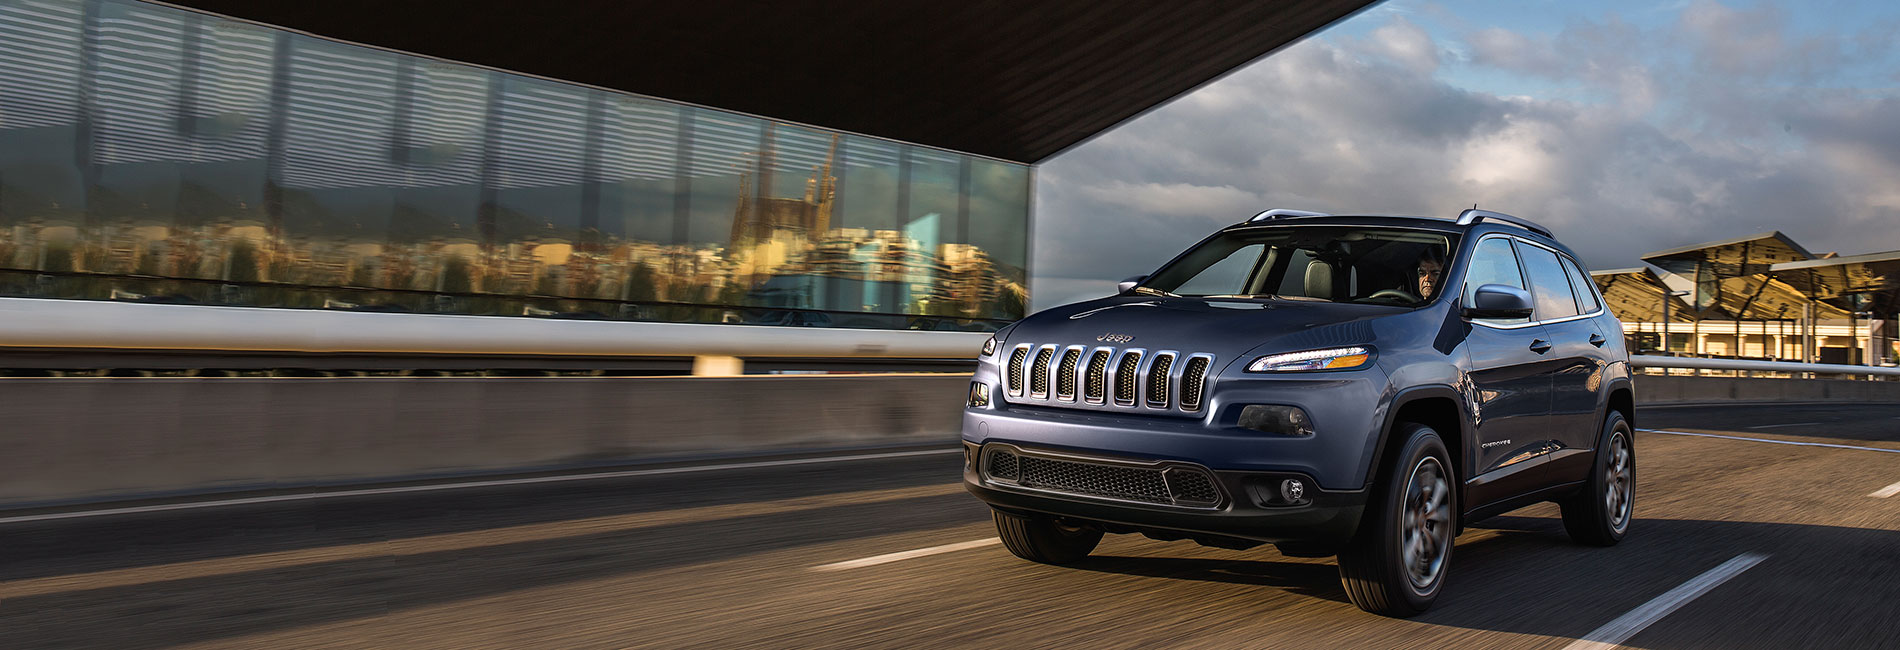 A new Jeep Cherokee driving on a bridge in a city.